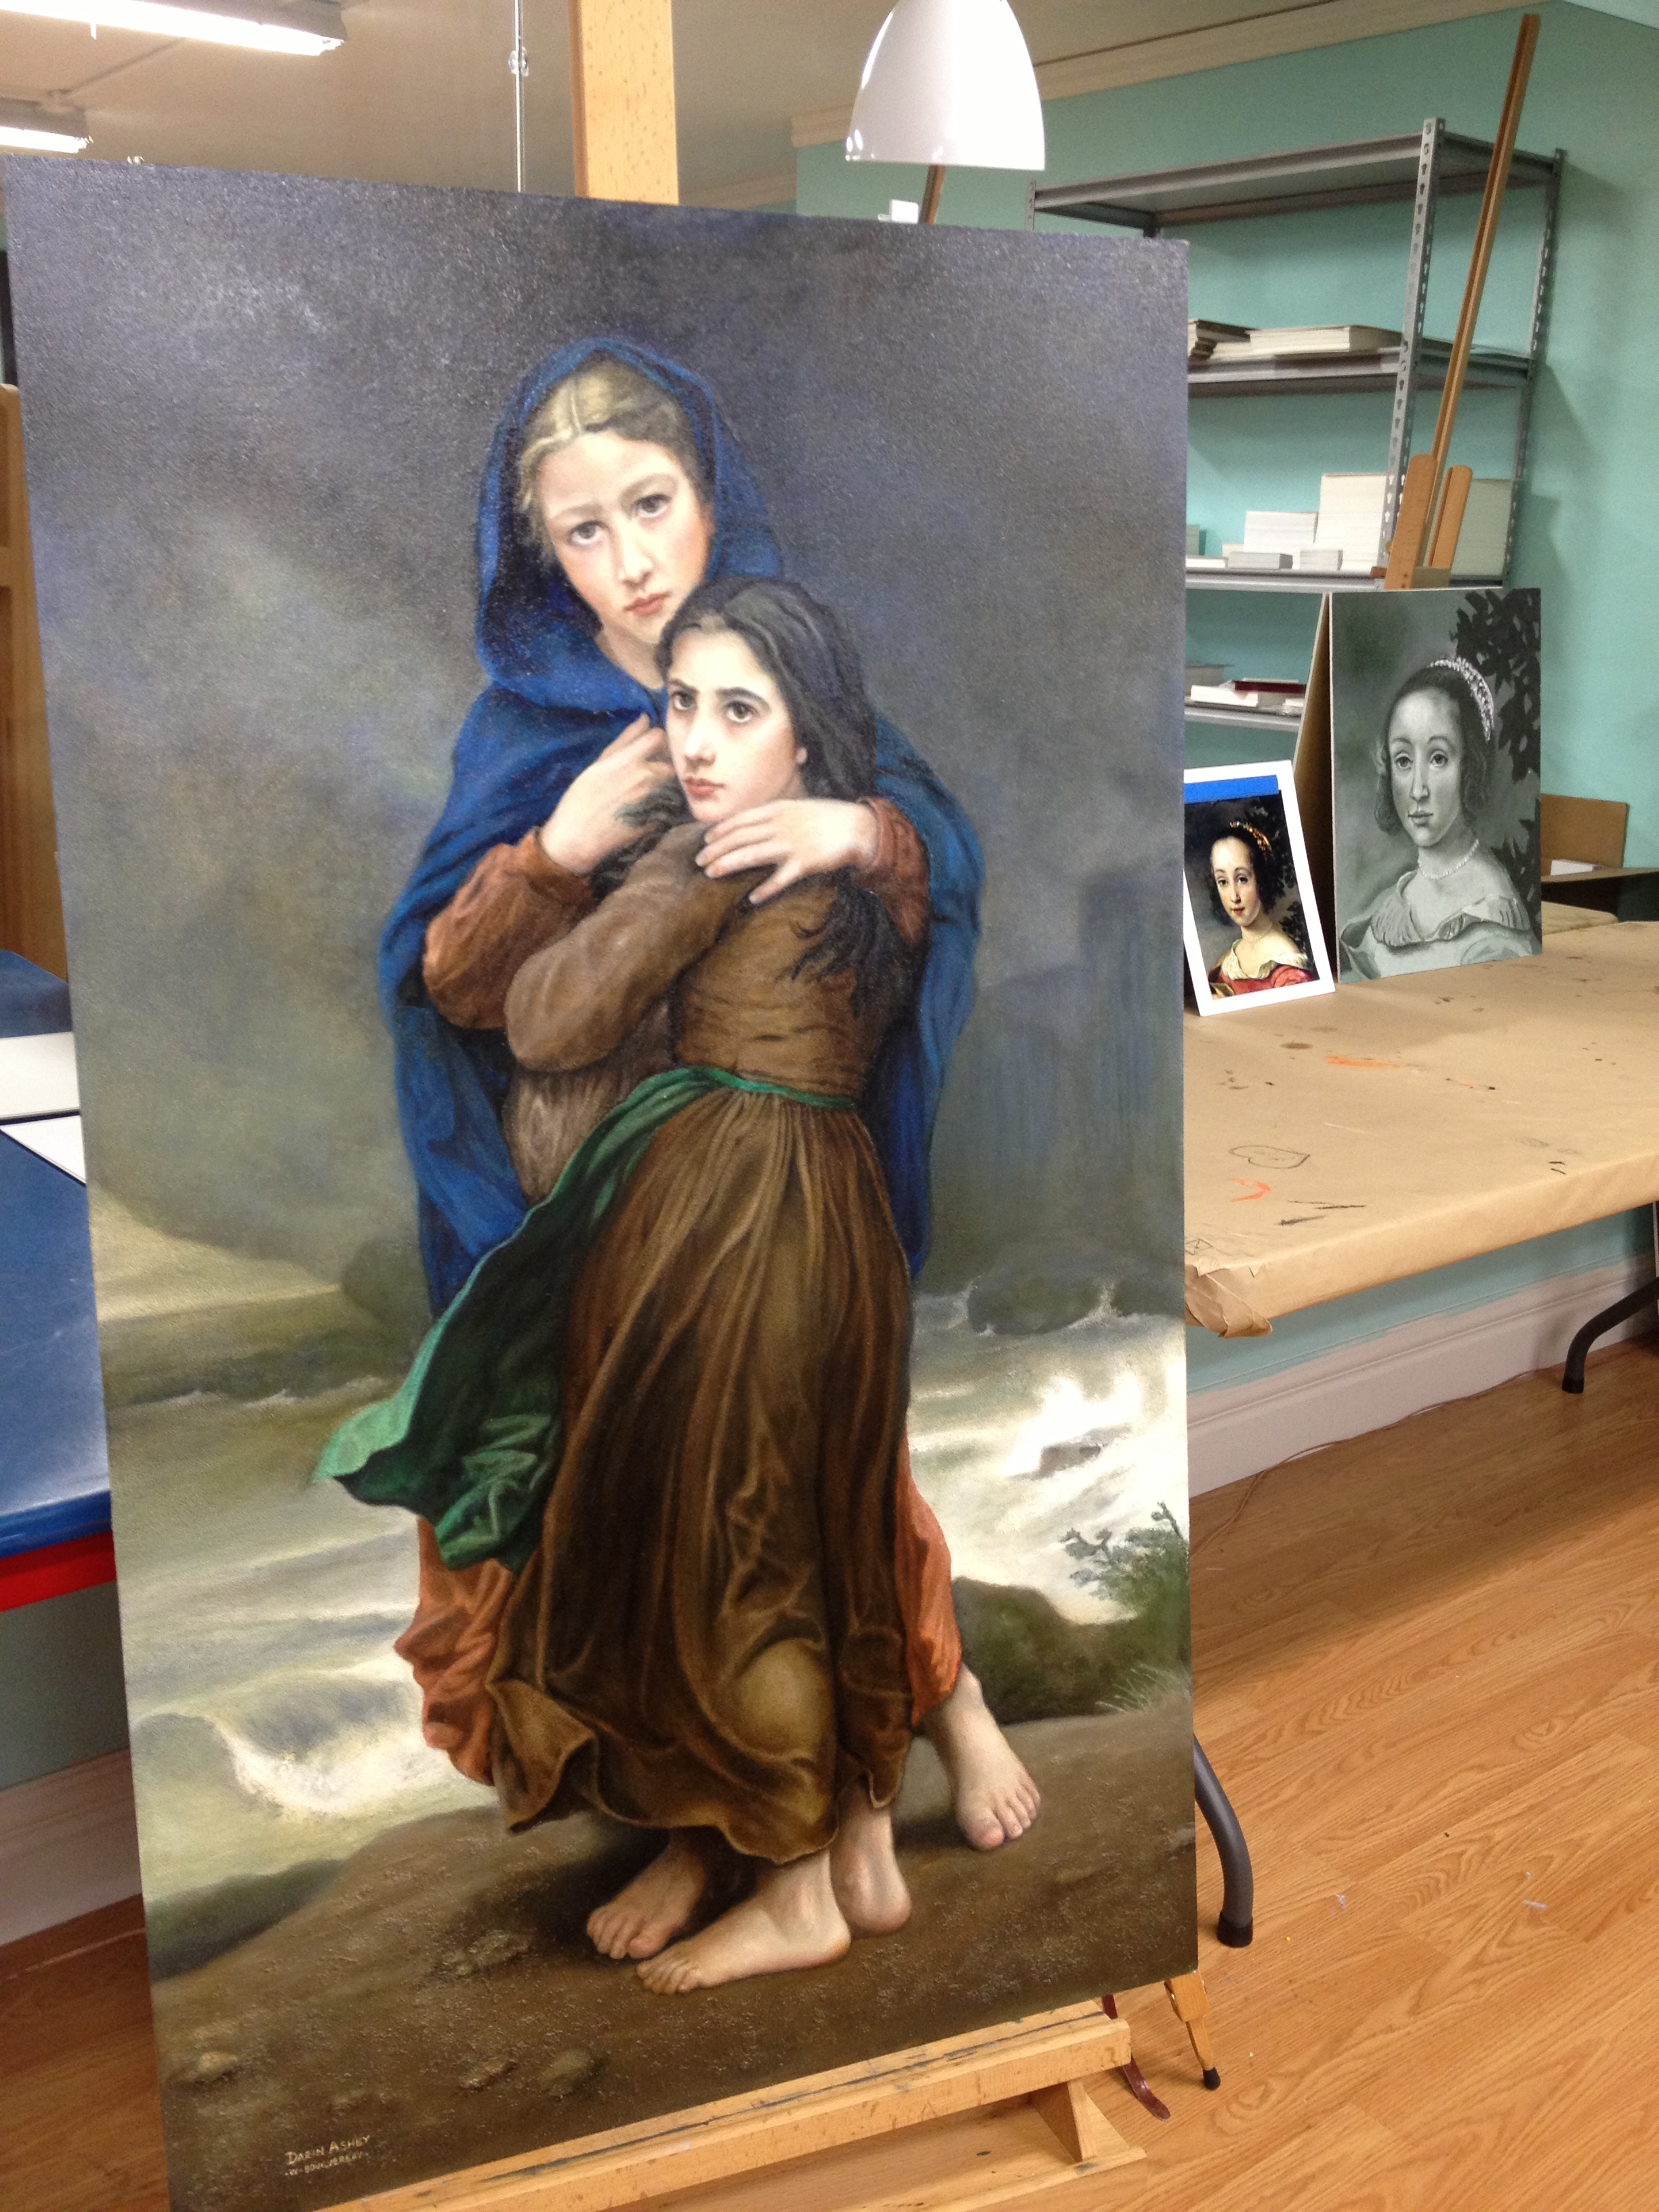 Adding color glazes to The Storm after William Bouguereau